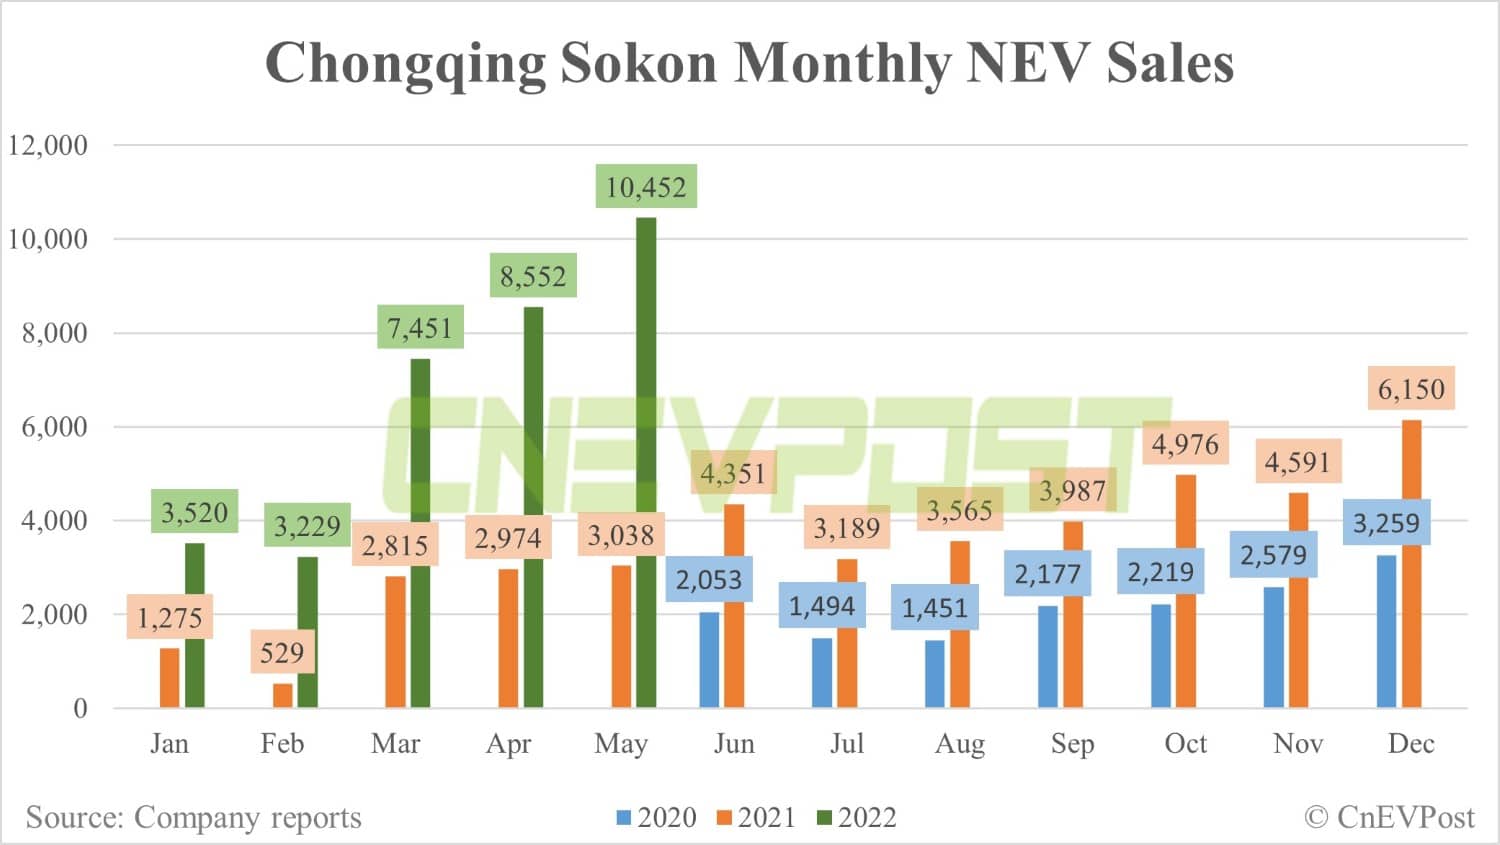 Chongqing Sokon sells 10,452 NEVs in May, up 22% from April-CnEVPost